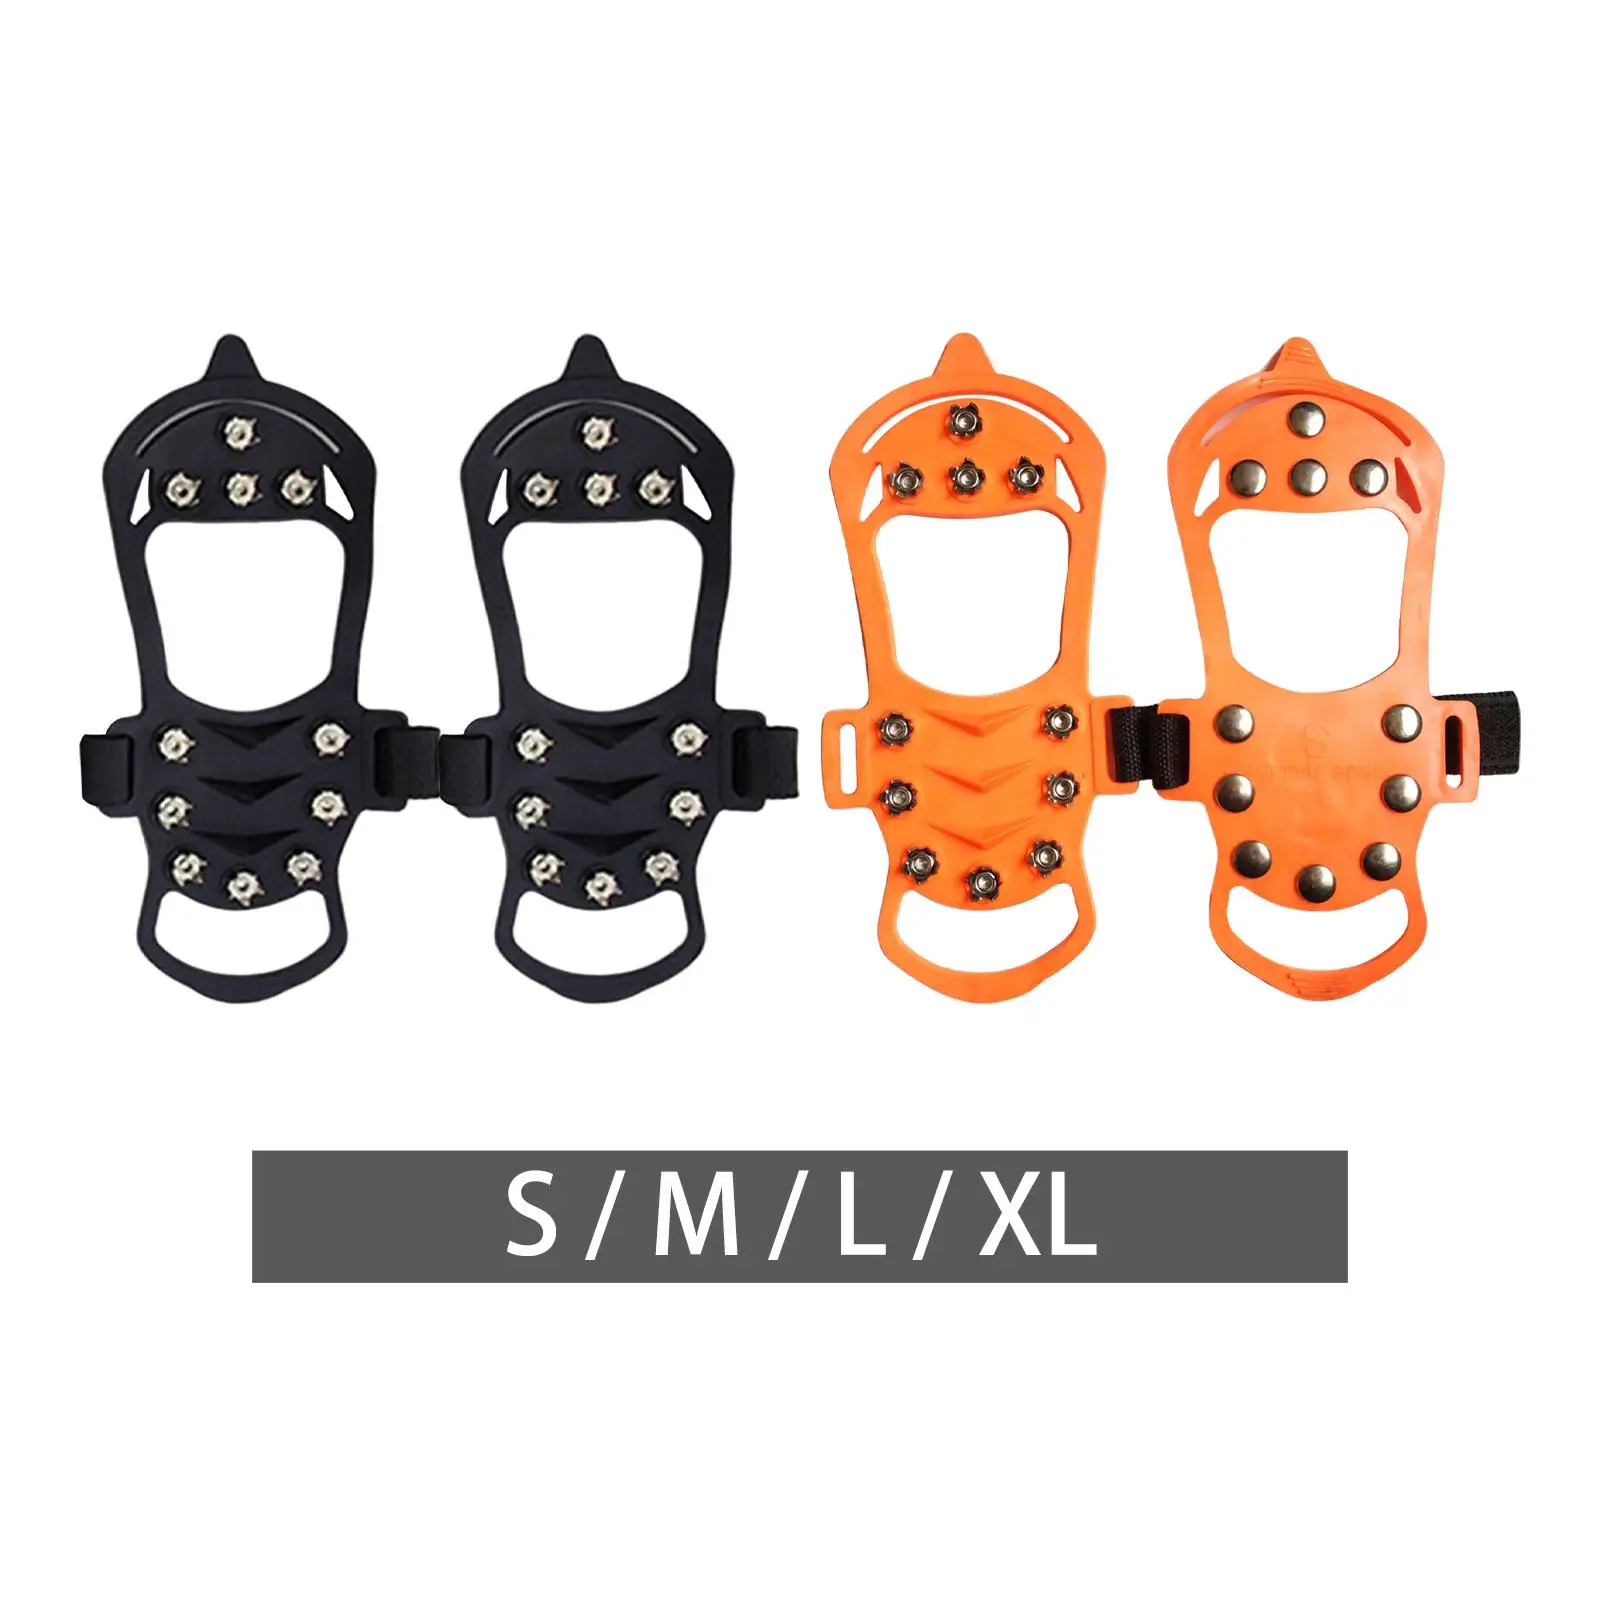 11 Spikes Crampons Portable Ice Cleats Traction for Hiking Shoes